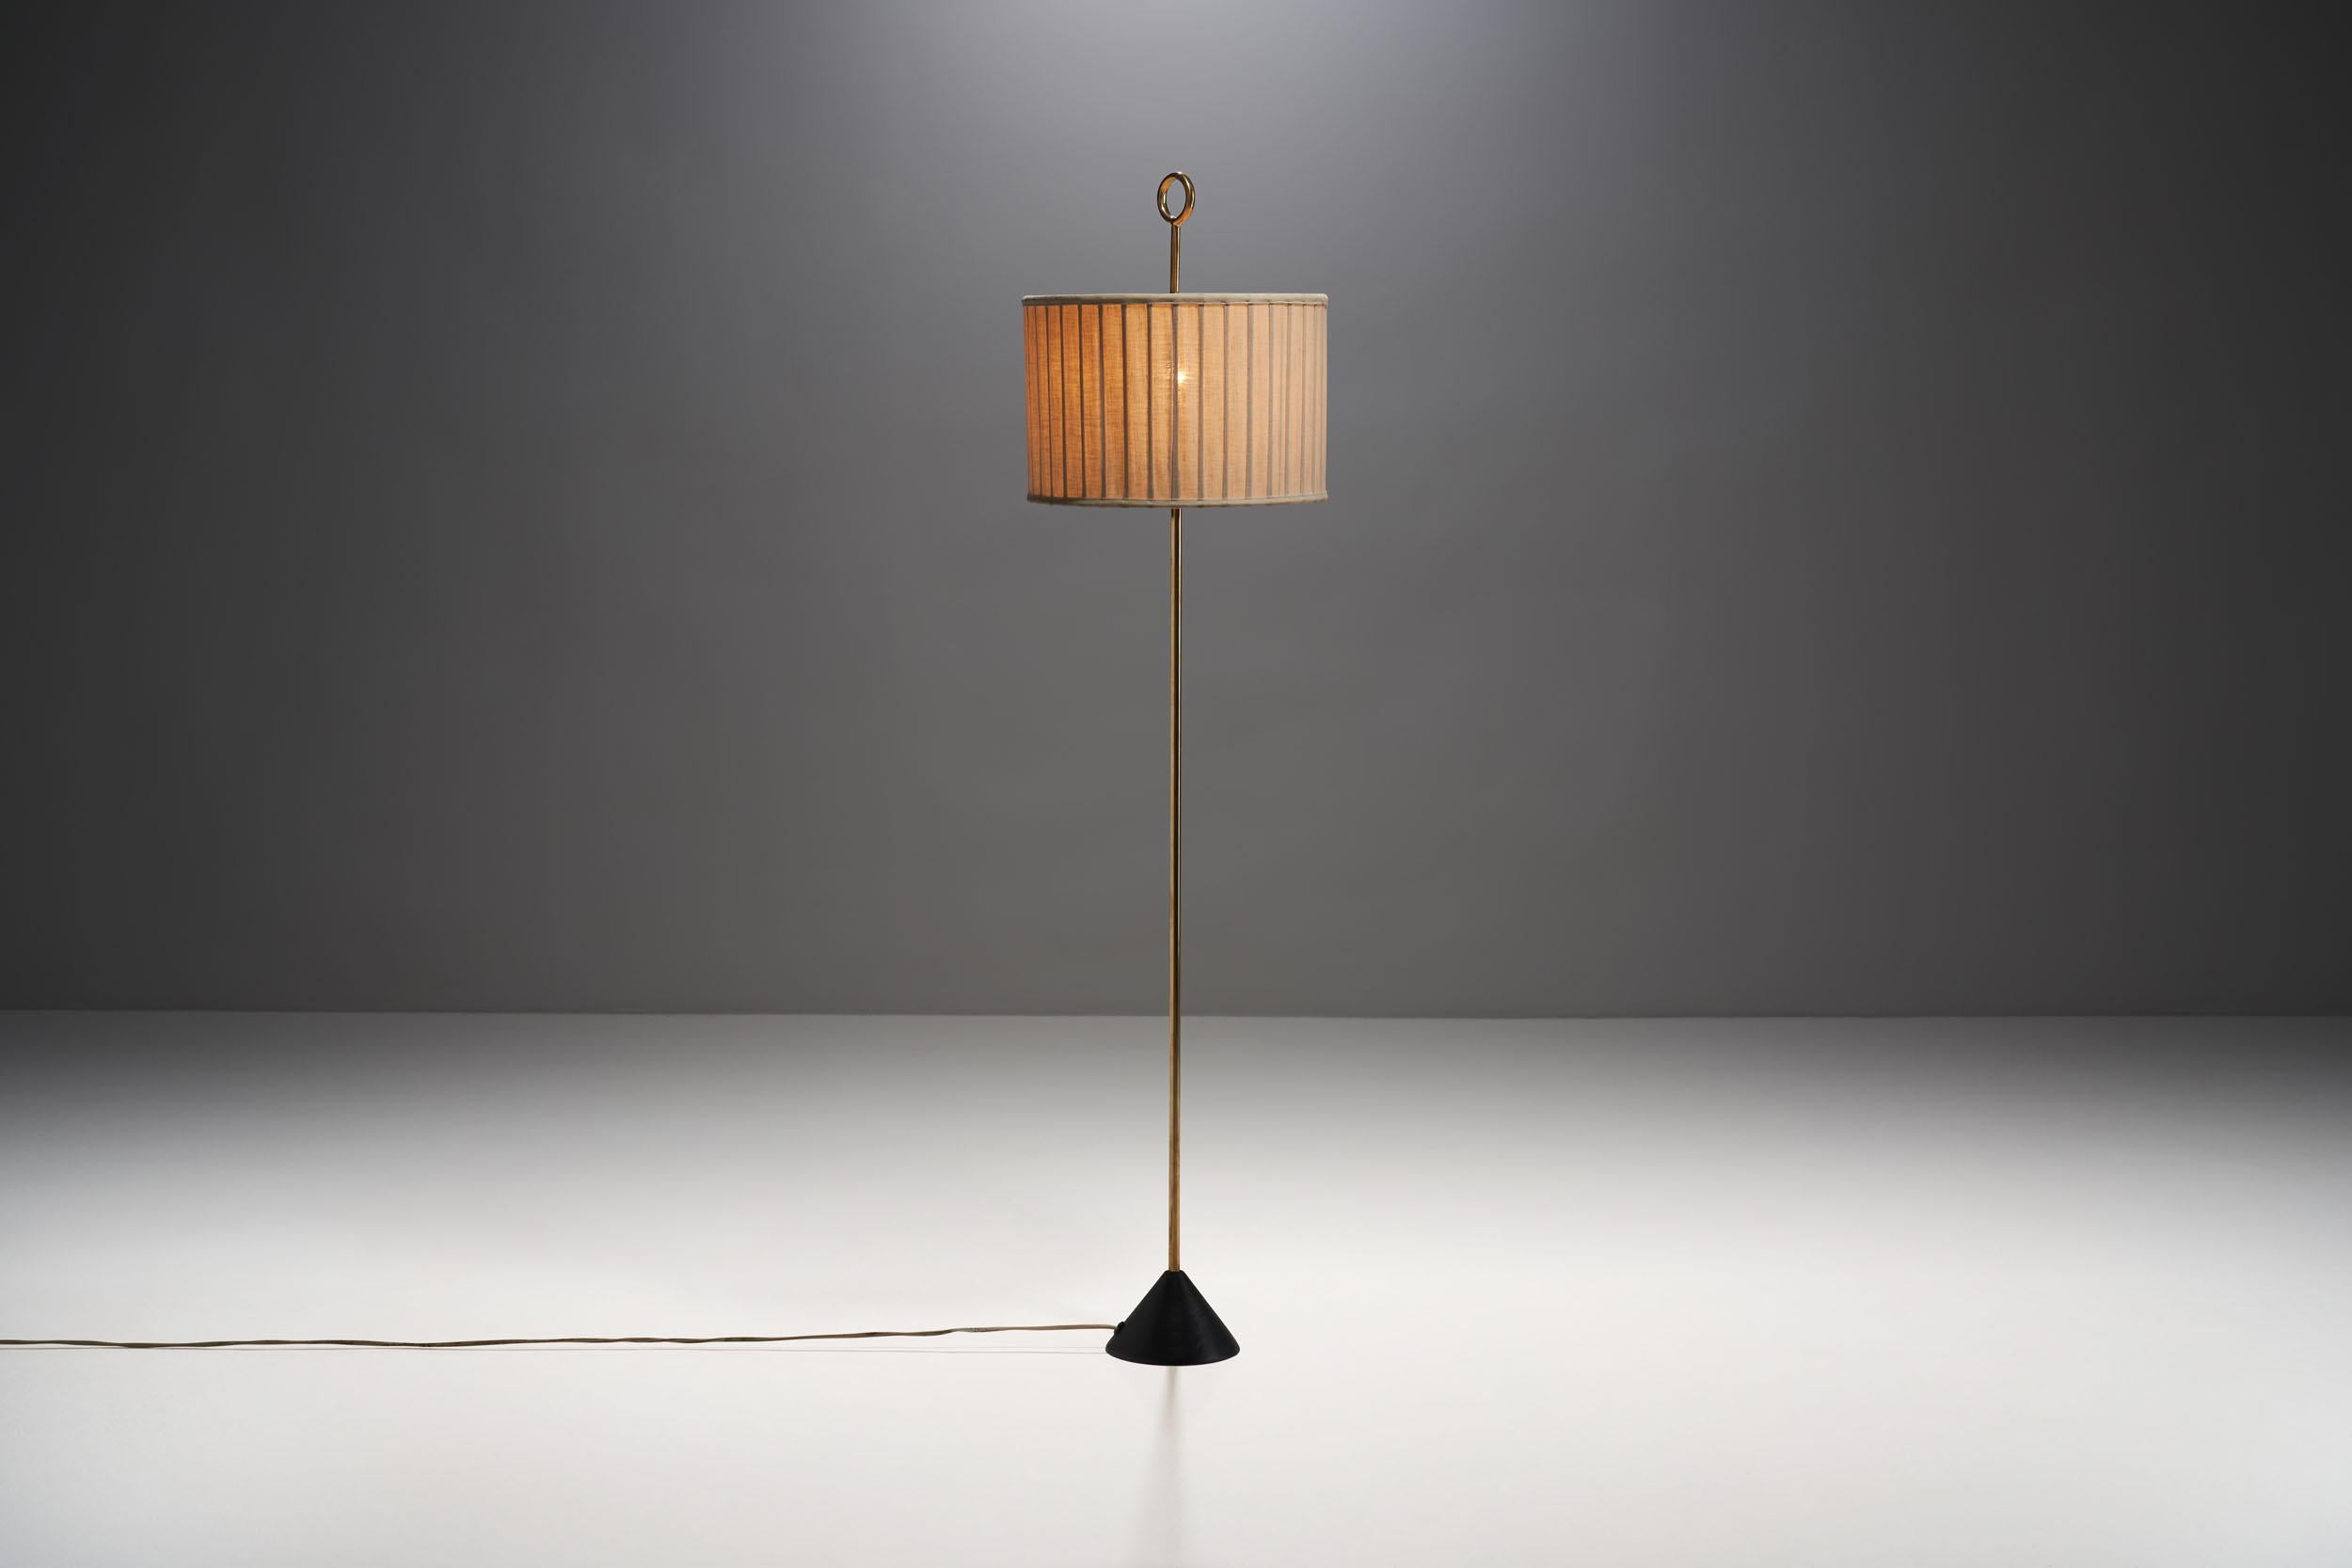 This floor lamp is the “G20” model by Swedish designer Hans-Agne Jakobsson. This mid-century model couples brass and fabric, creating a beautiful modern look.

This appealing and very rare lamp consists of a pleated fabric shade that is supported by